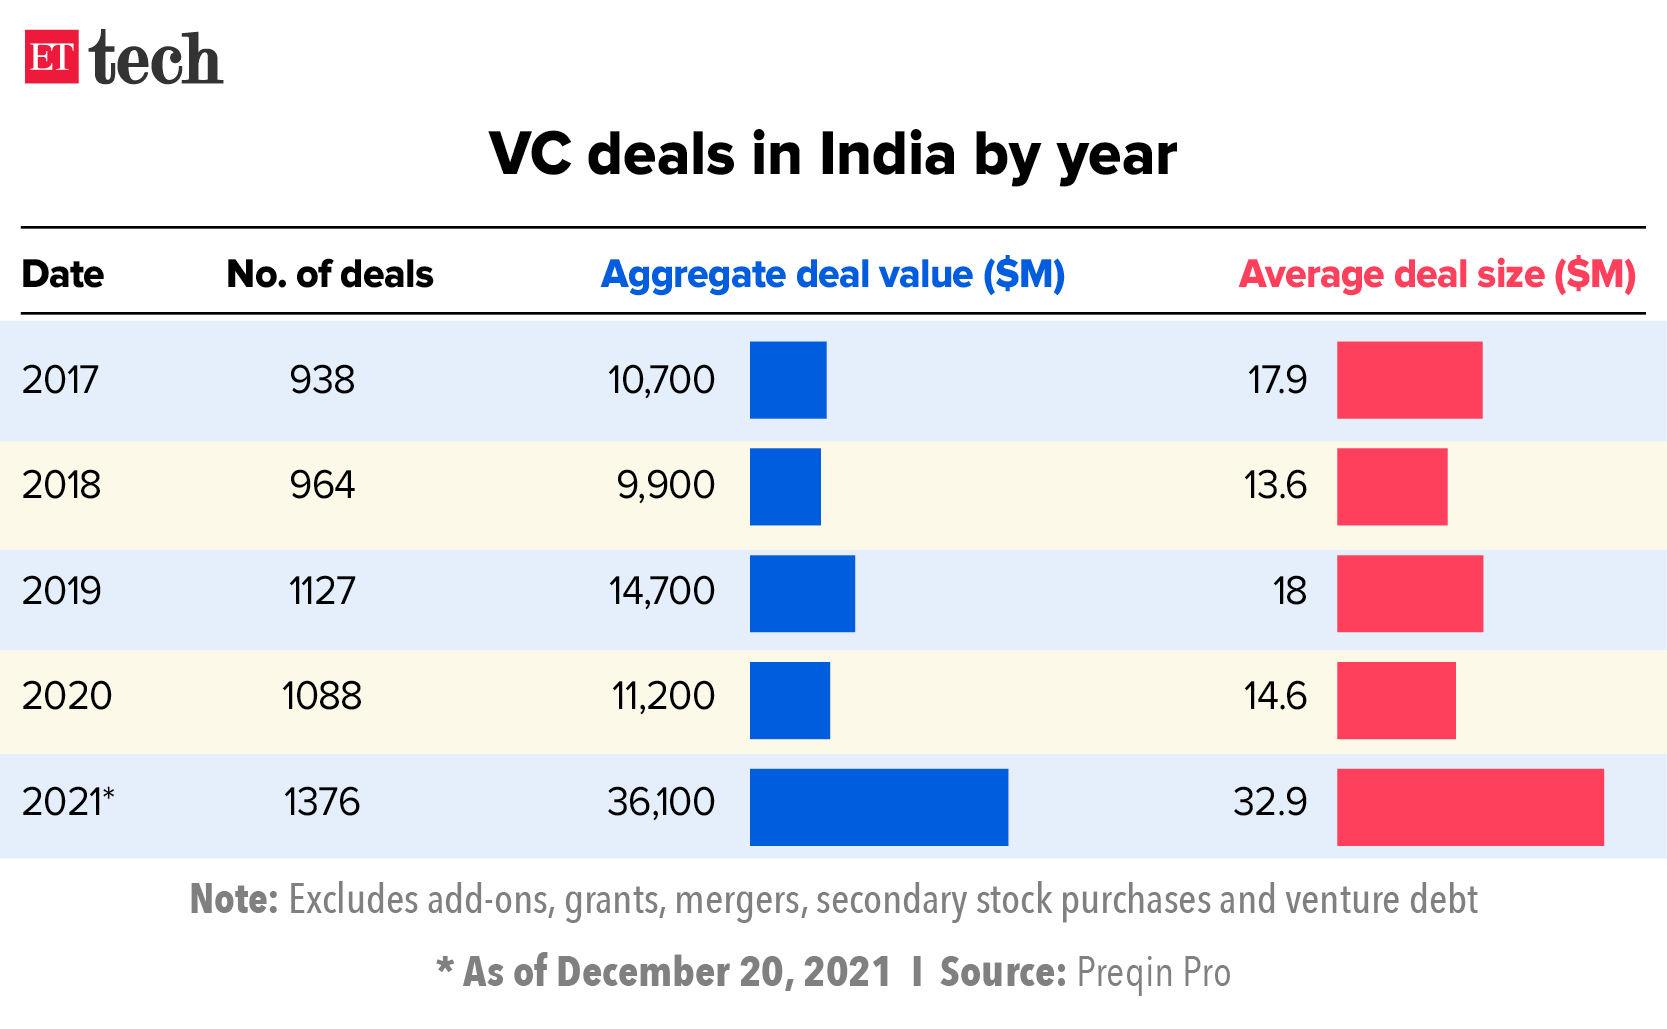 VC deals in India by year